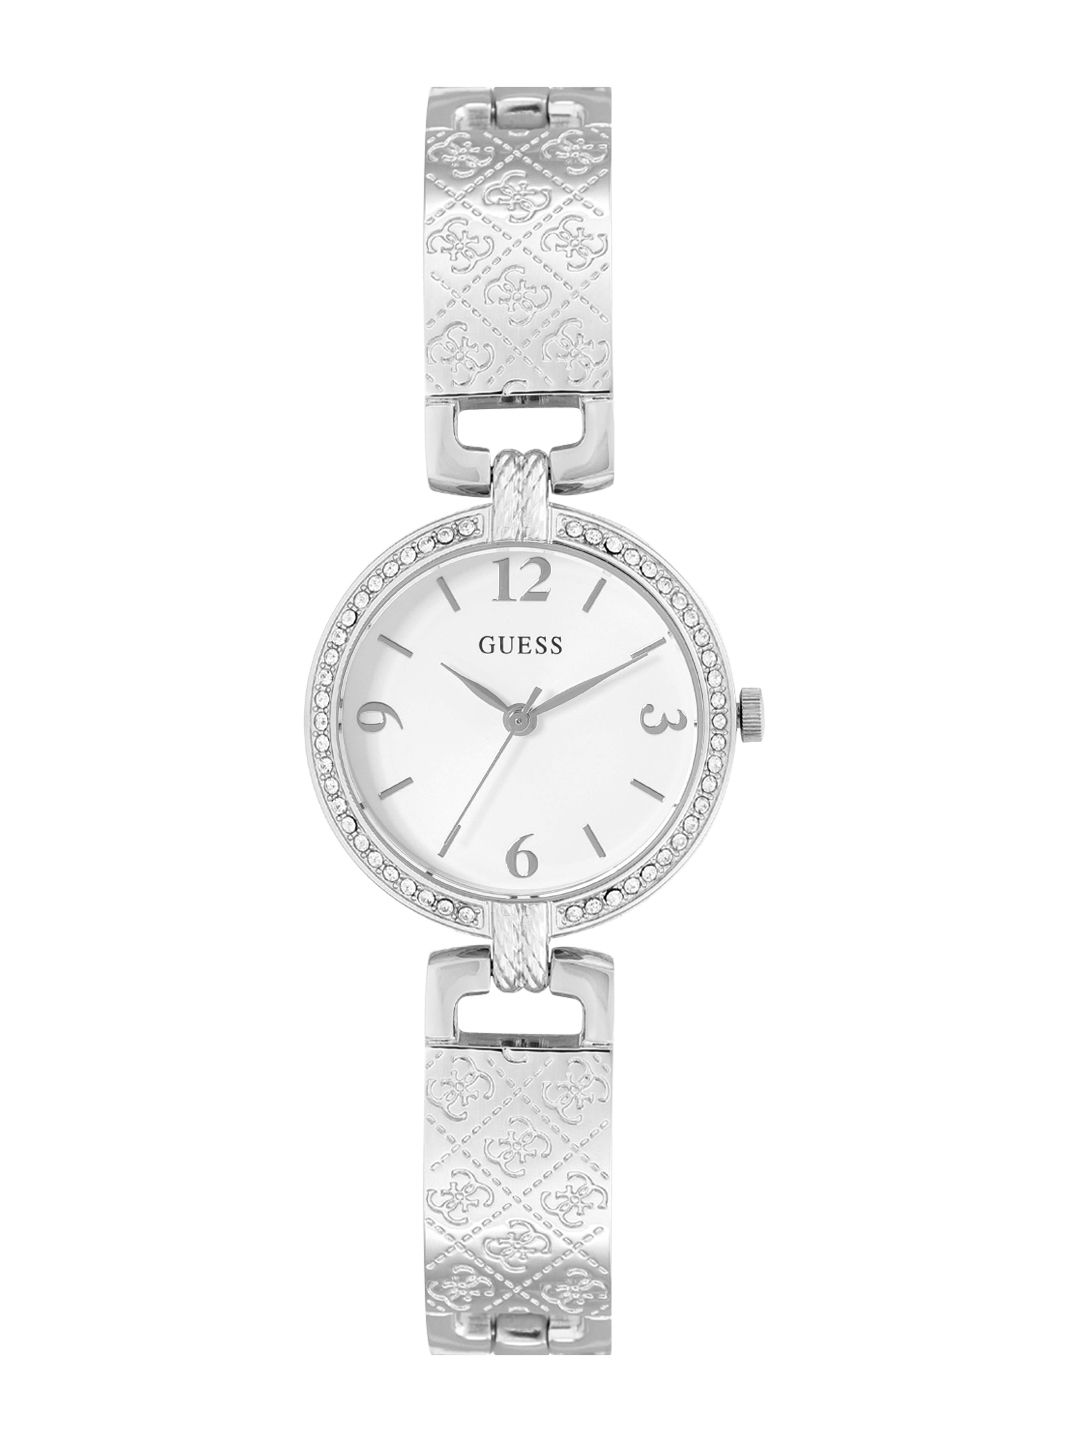 GUESS Women White Embellished Dial & Stainless Steel Strap Analogue Watch GW0112L1 Price in India